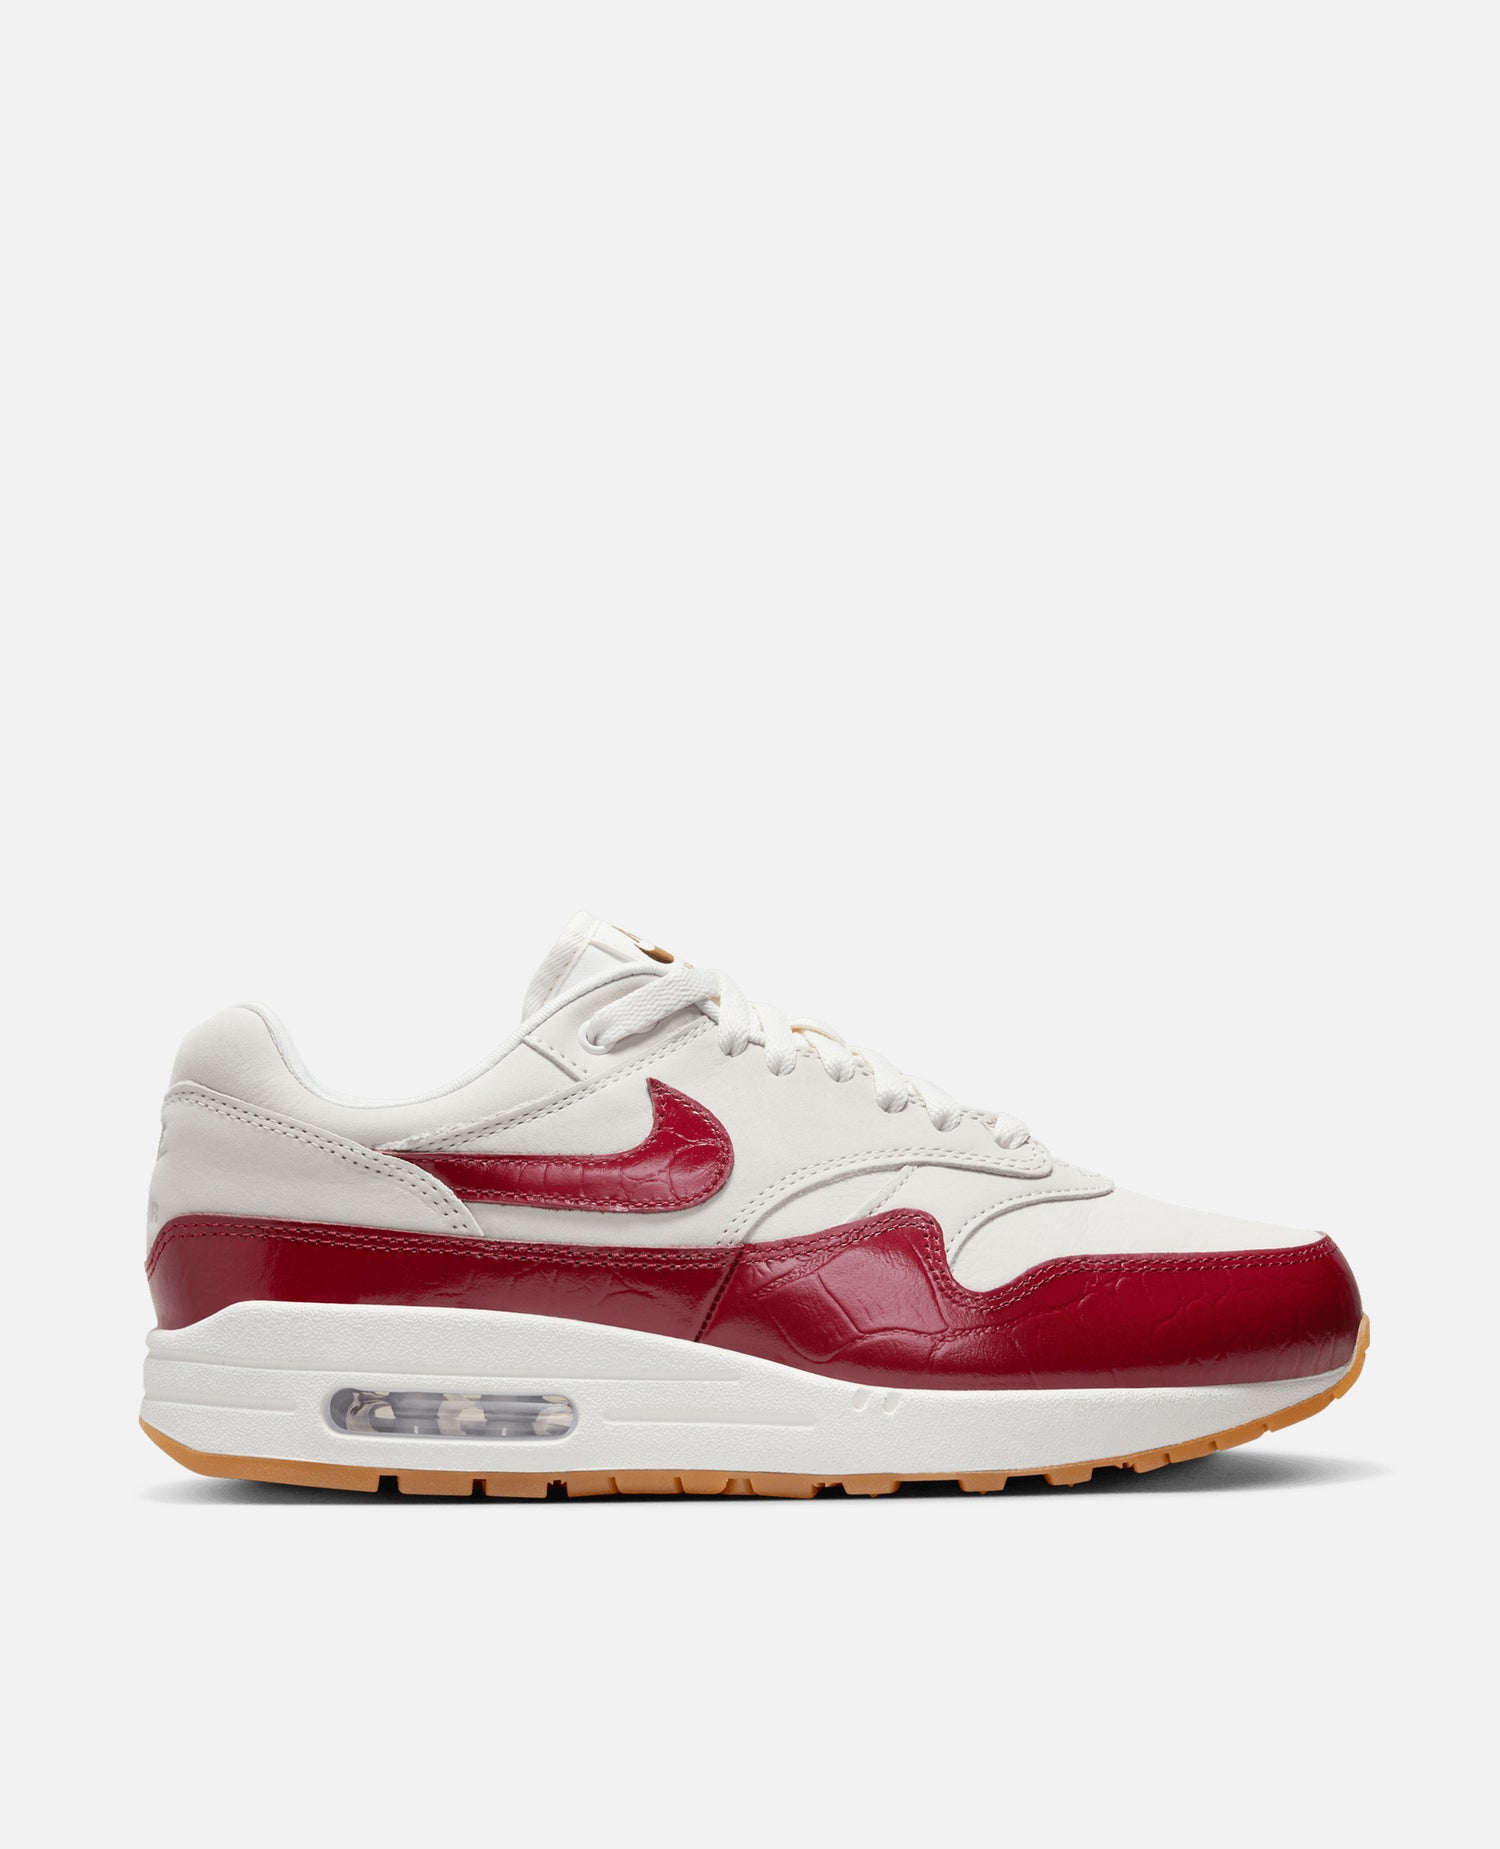 Nike Femme Air Max 1 Lx (Voile/Team Rouge-Voile-Gomme Marron Clair)